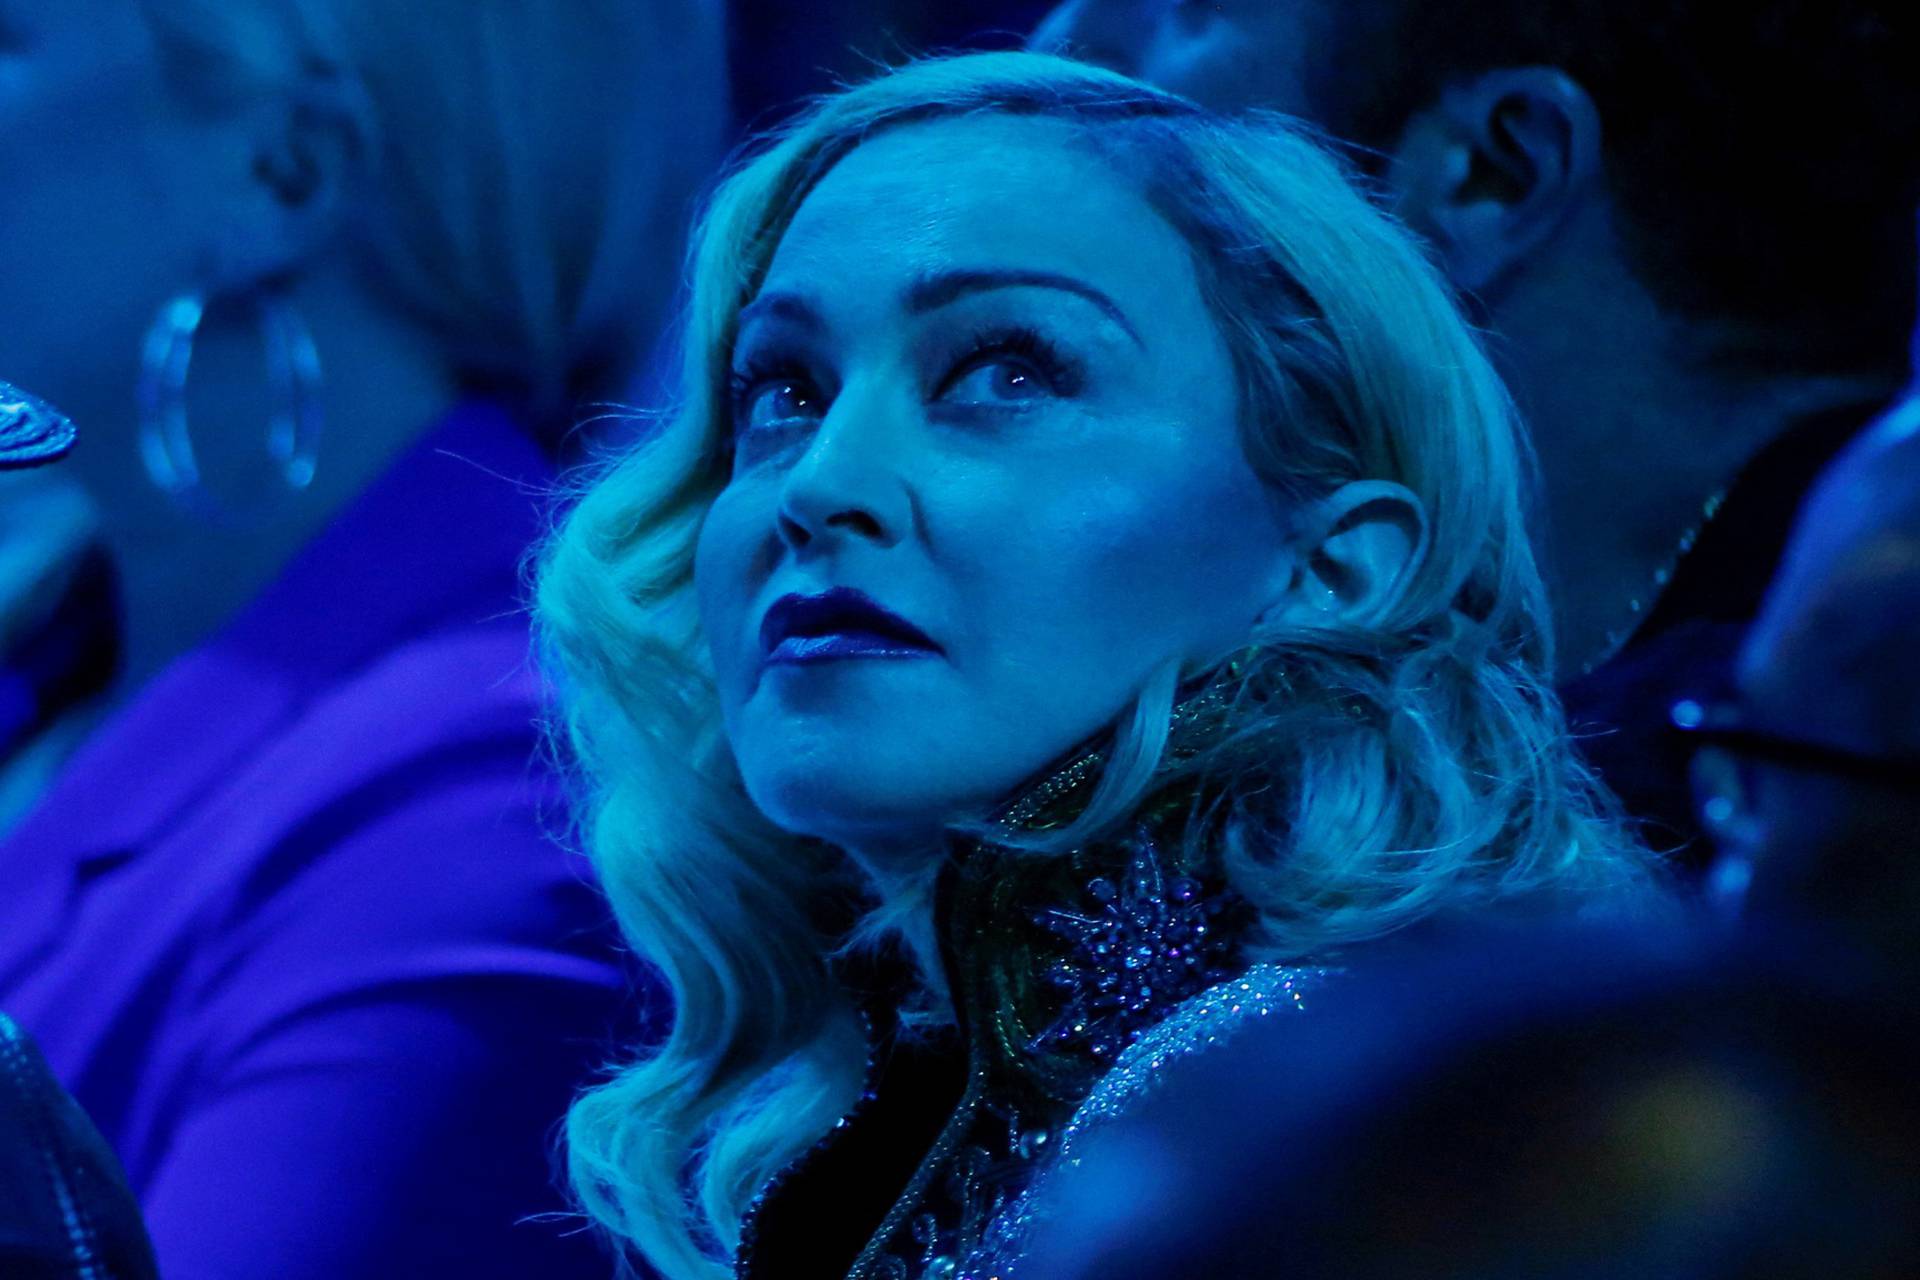 FILE PHOTO: FILE PHOTO: Singer Madonna attends the 30th annual GLAAD awards ceremony in New York City, New York